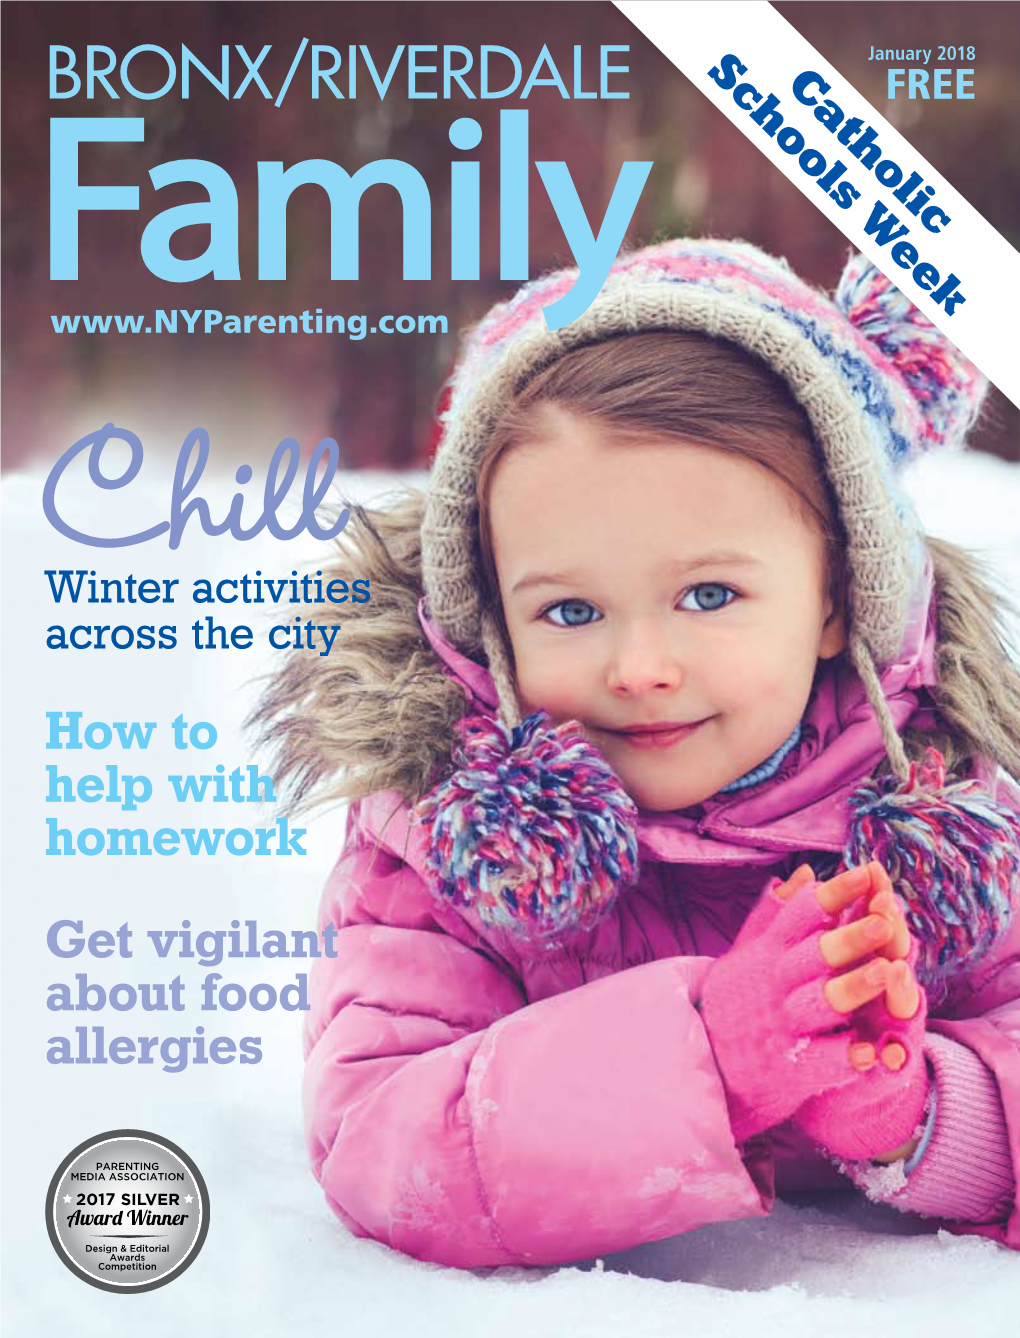 Bronx/Riverdale Catholicfree Family Chill Winter Activities Across the City How to Help with Homework Get Vigilant About Food Allergies